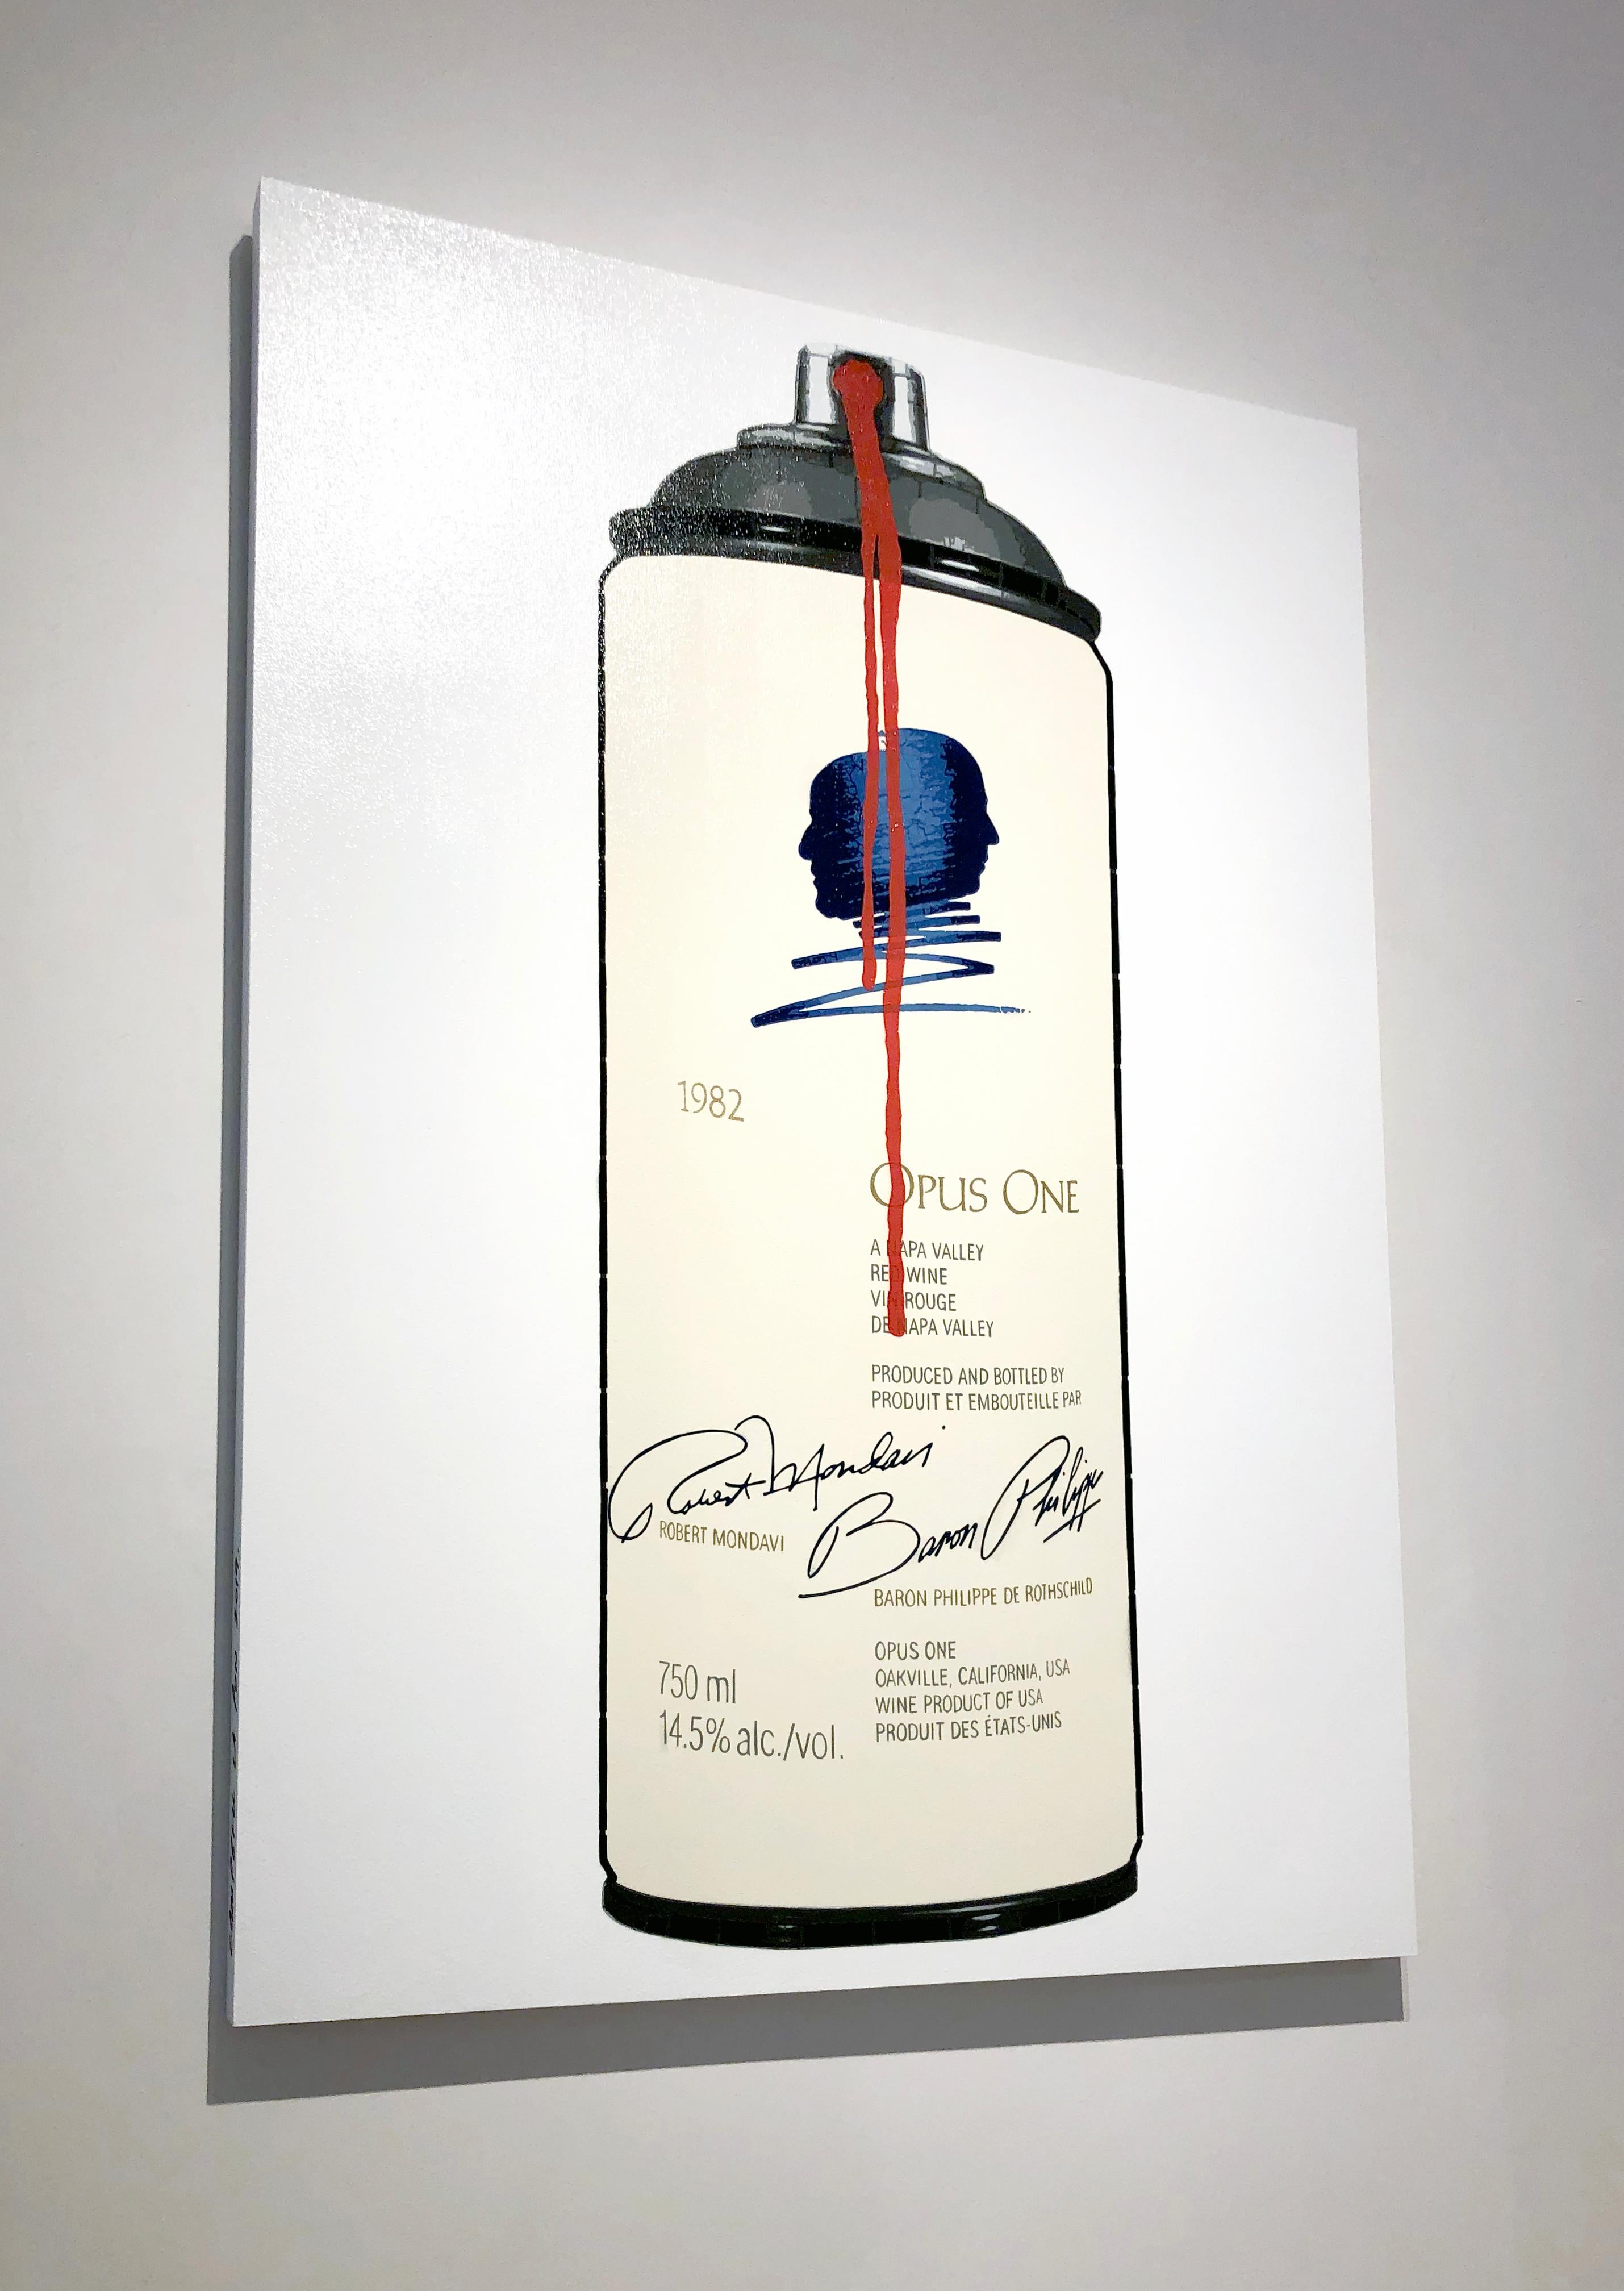 Opus One - Contemporary Painting by Campbell la Pun